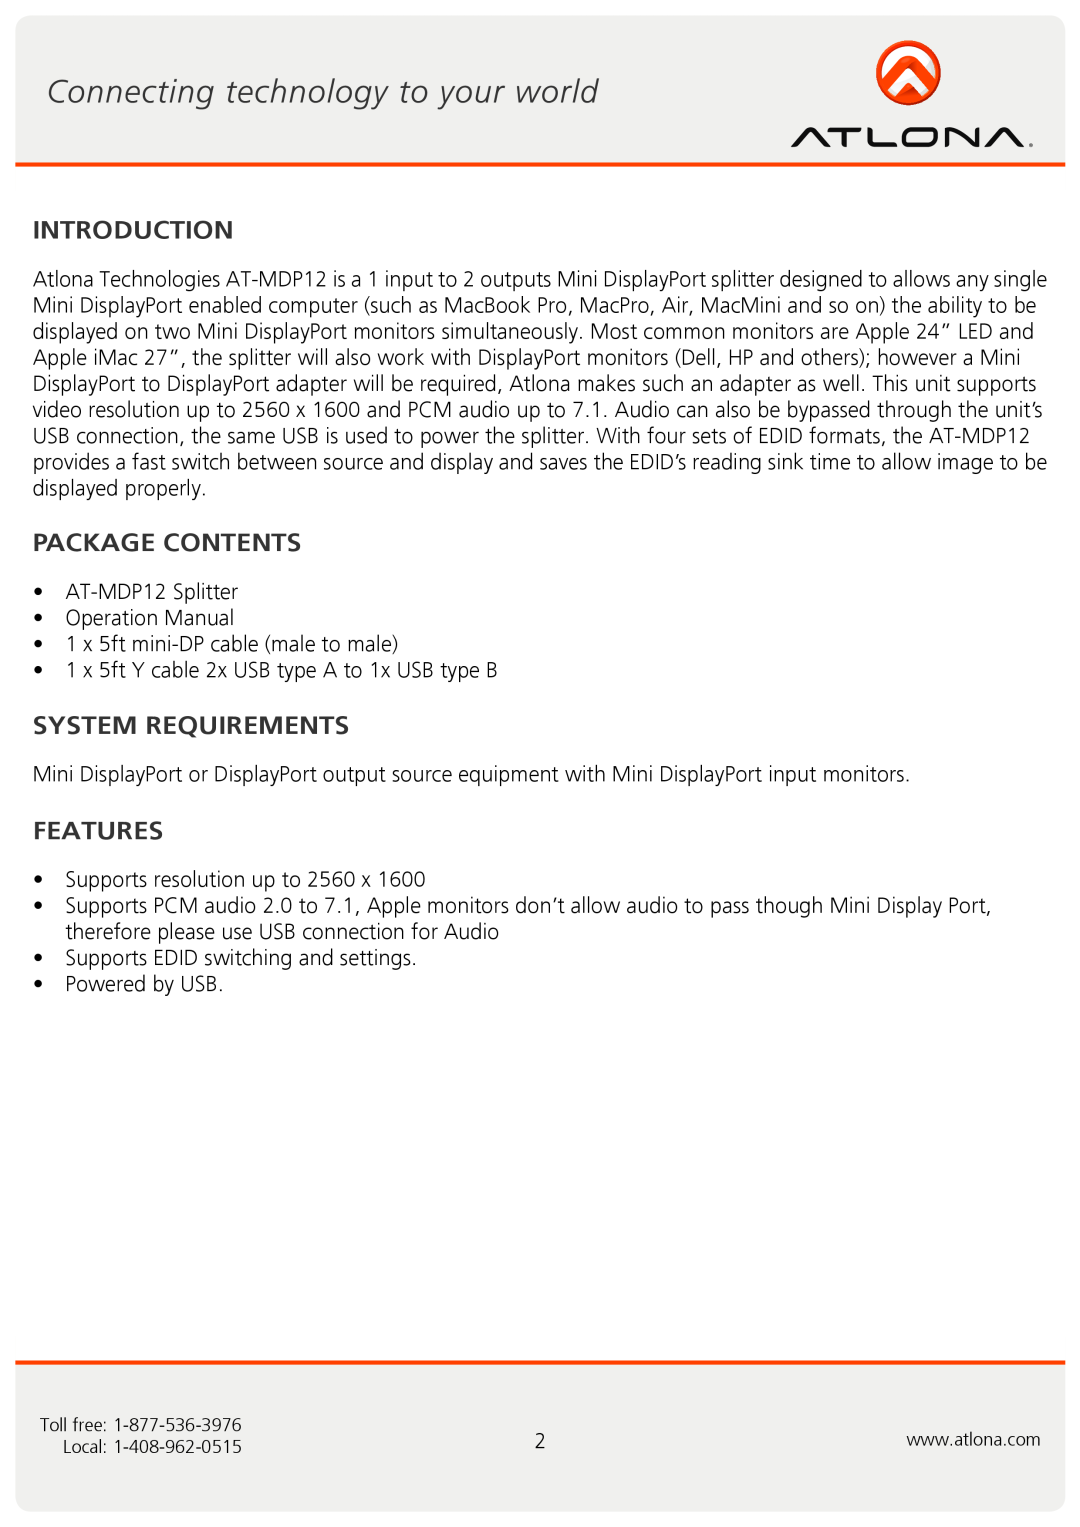 Atlona AT-MDP12 user manual Introduction, Package Contents, System Requirements, Features 